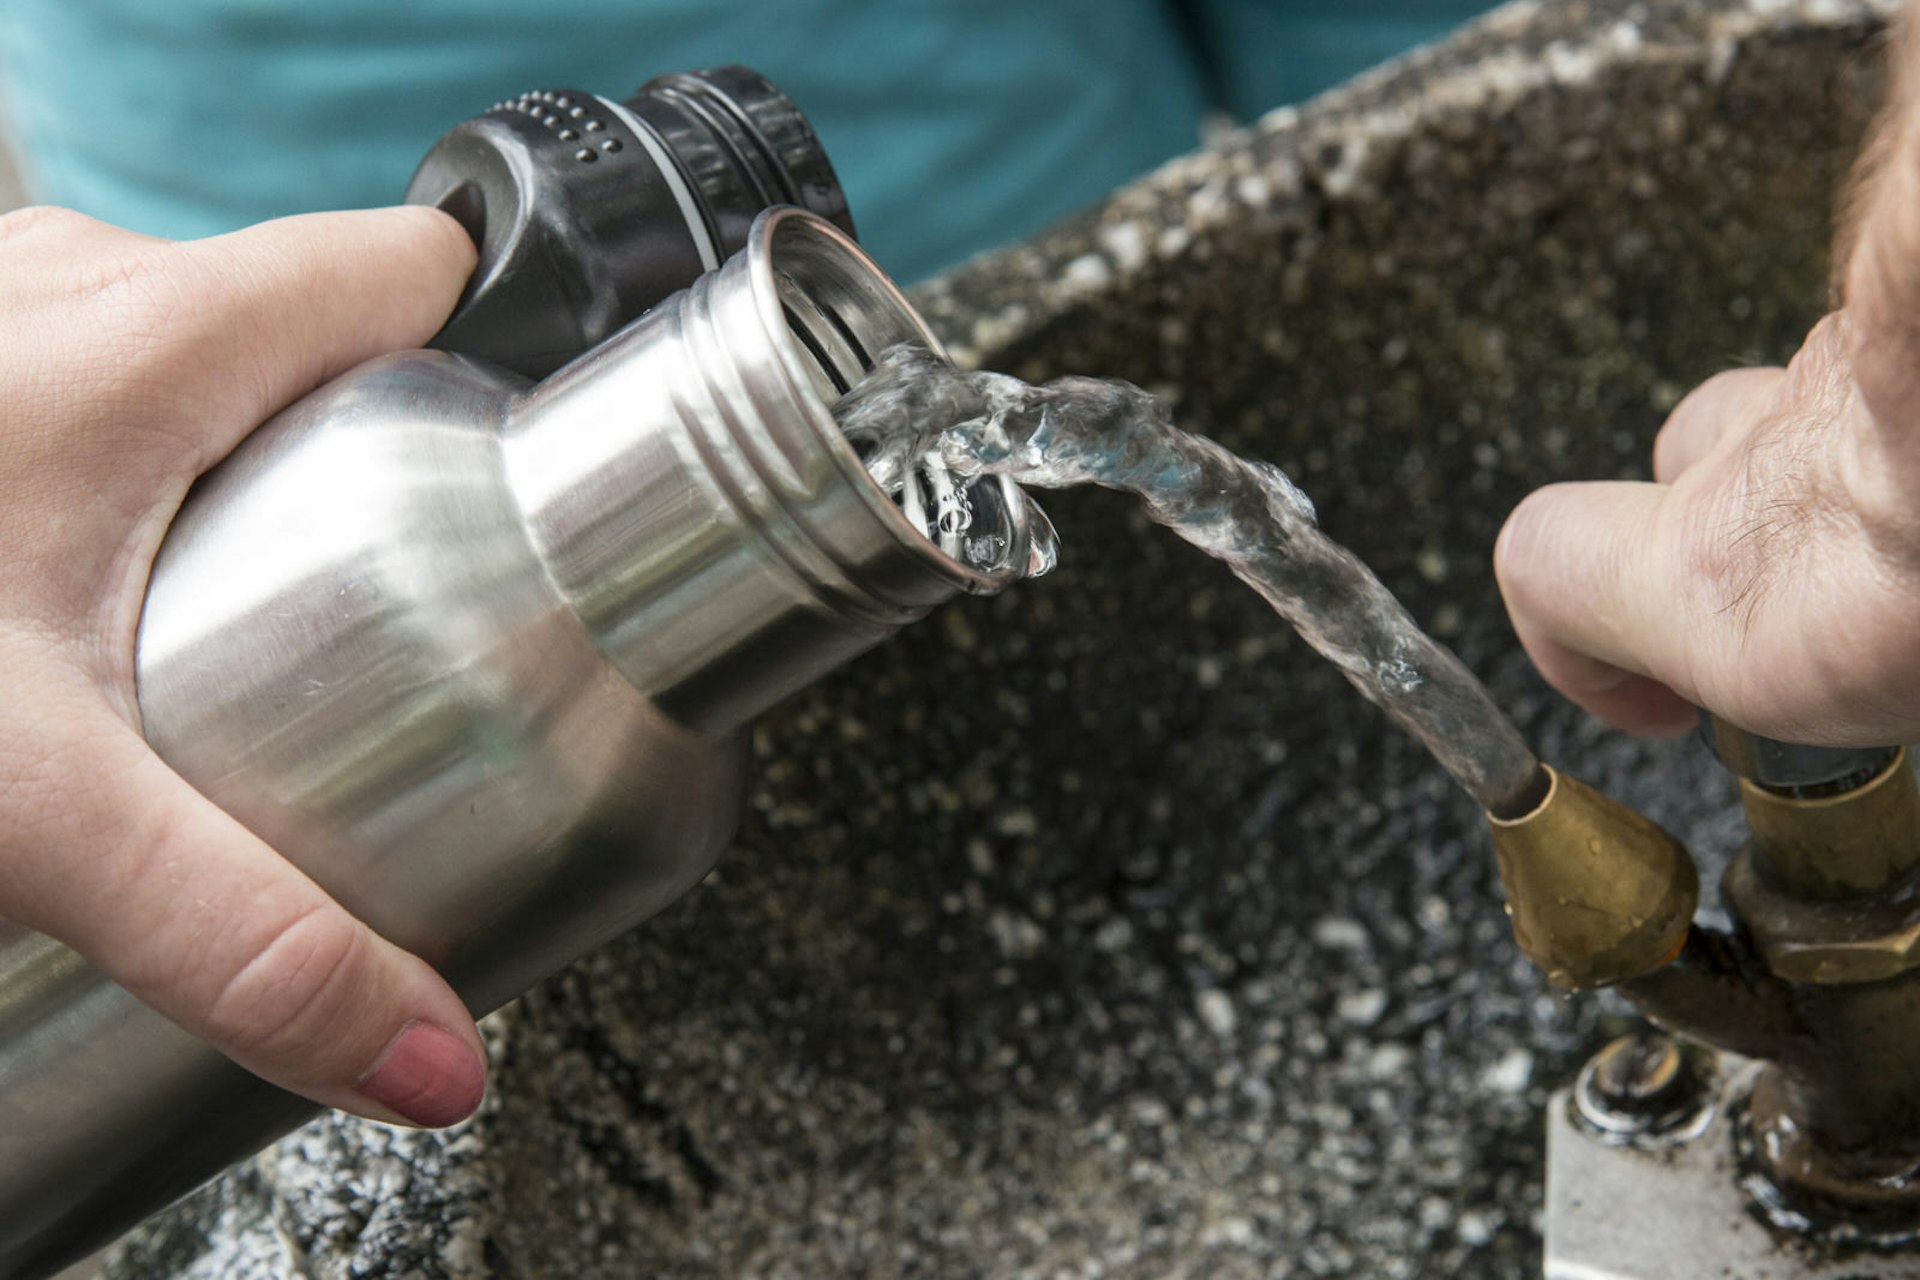 Refilling a reusable tin water bottle at a water fountain